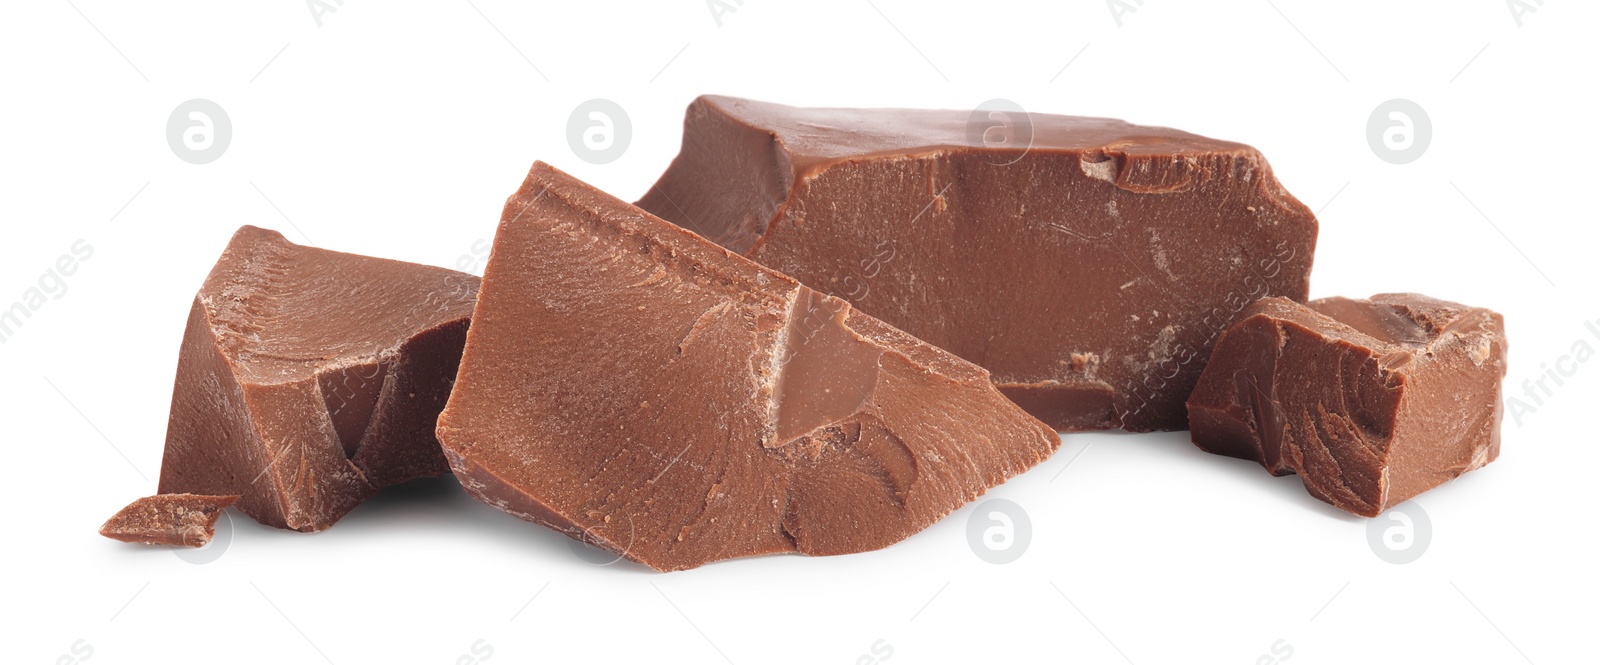 Photo of Pieces of tasty milk chocolate isolated on white